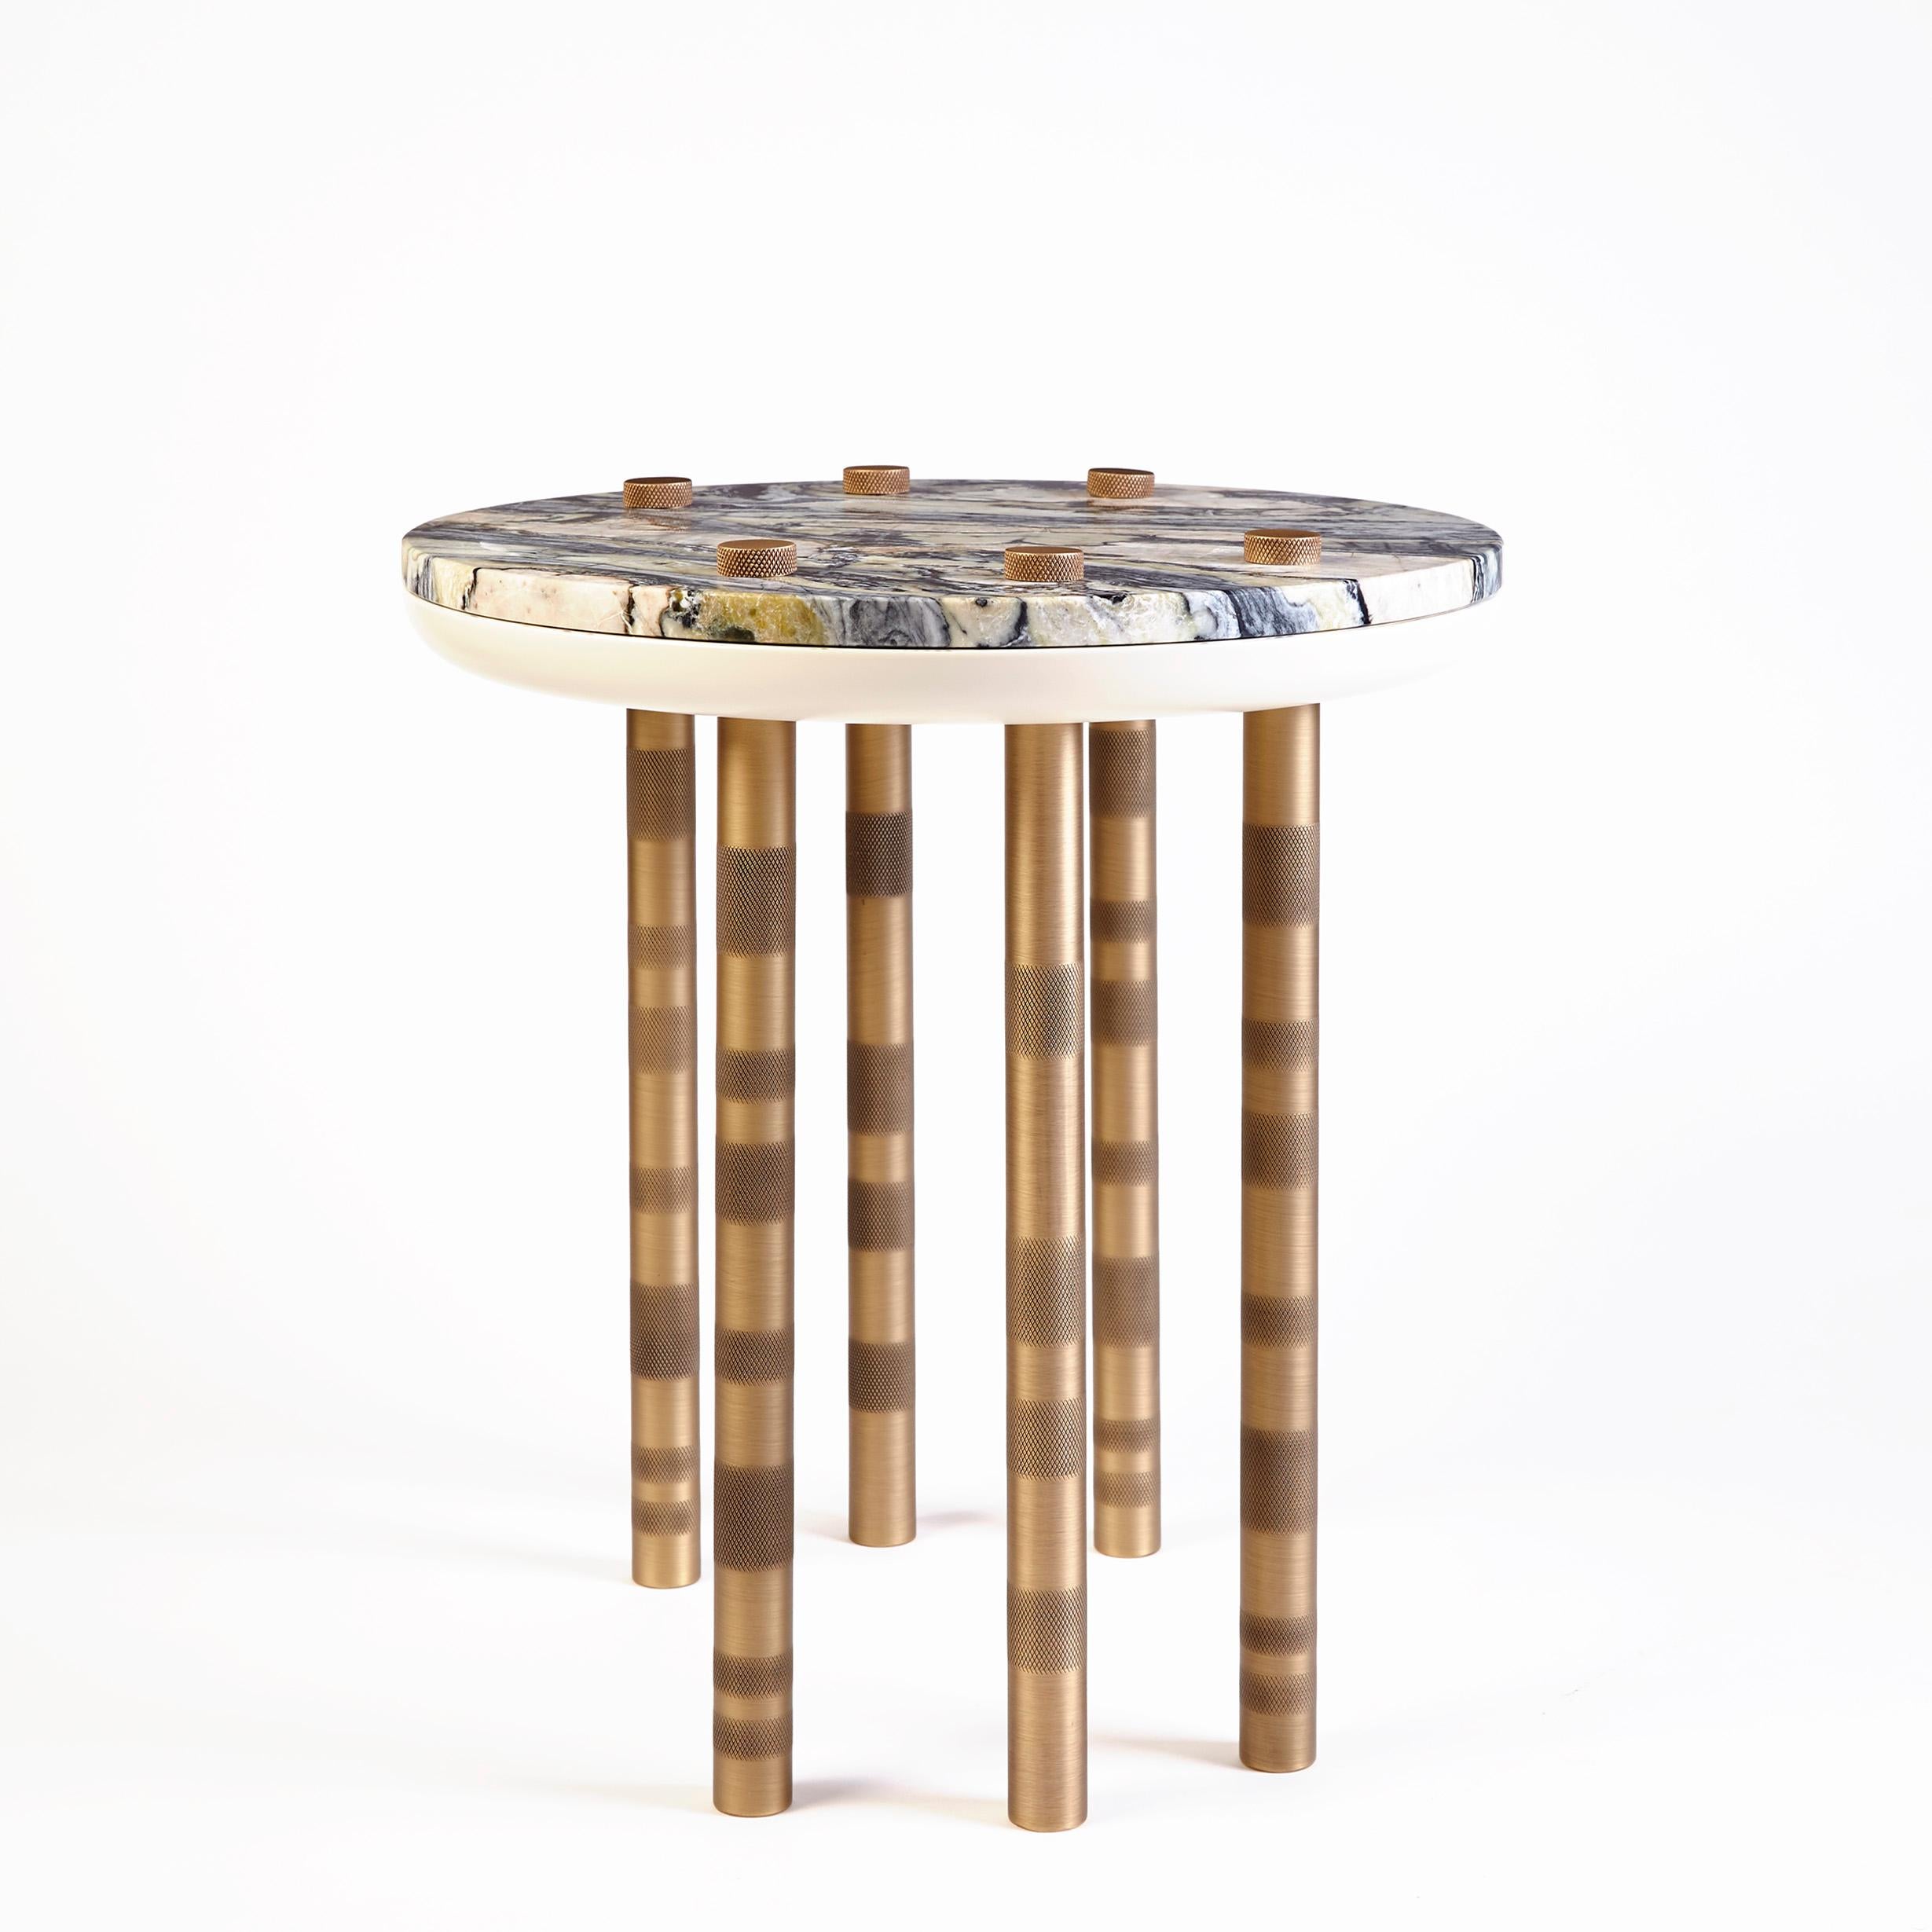 Ipanema Brass Marble Side Table, Marble Top and Brushed Brass Legs by Duistt

The rounded geometric shapes of the ipanema series refer to the imagination of the well-known sidewalk in rio de janeiro. We invested in fresh finishes, with colours that